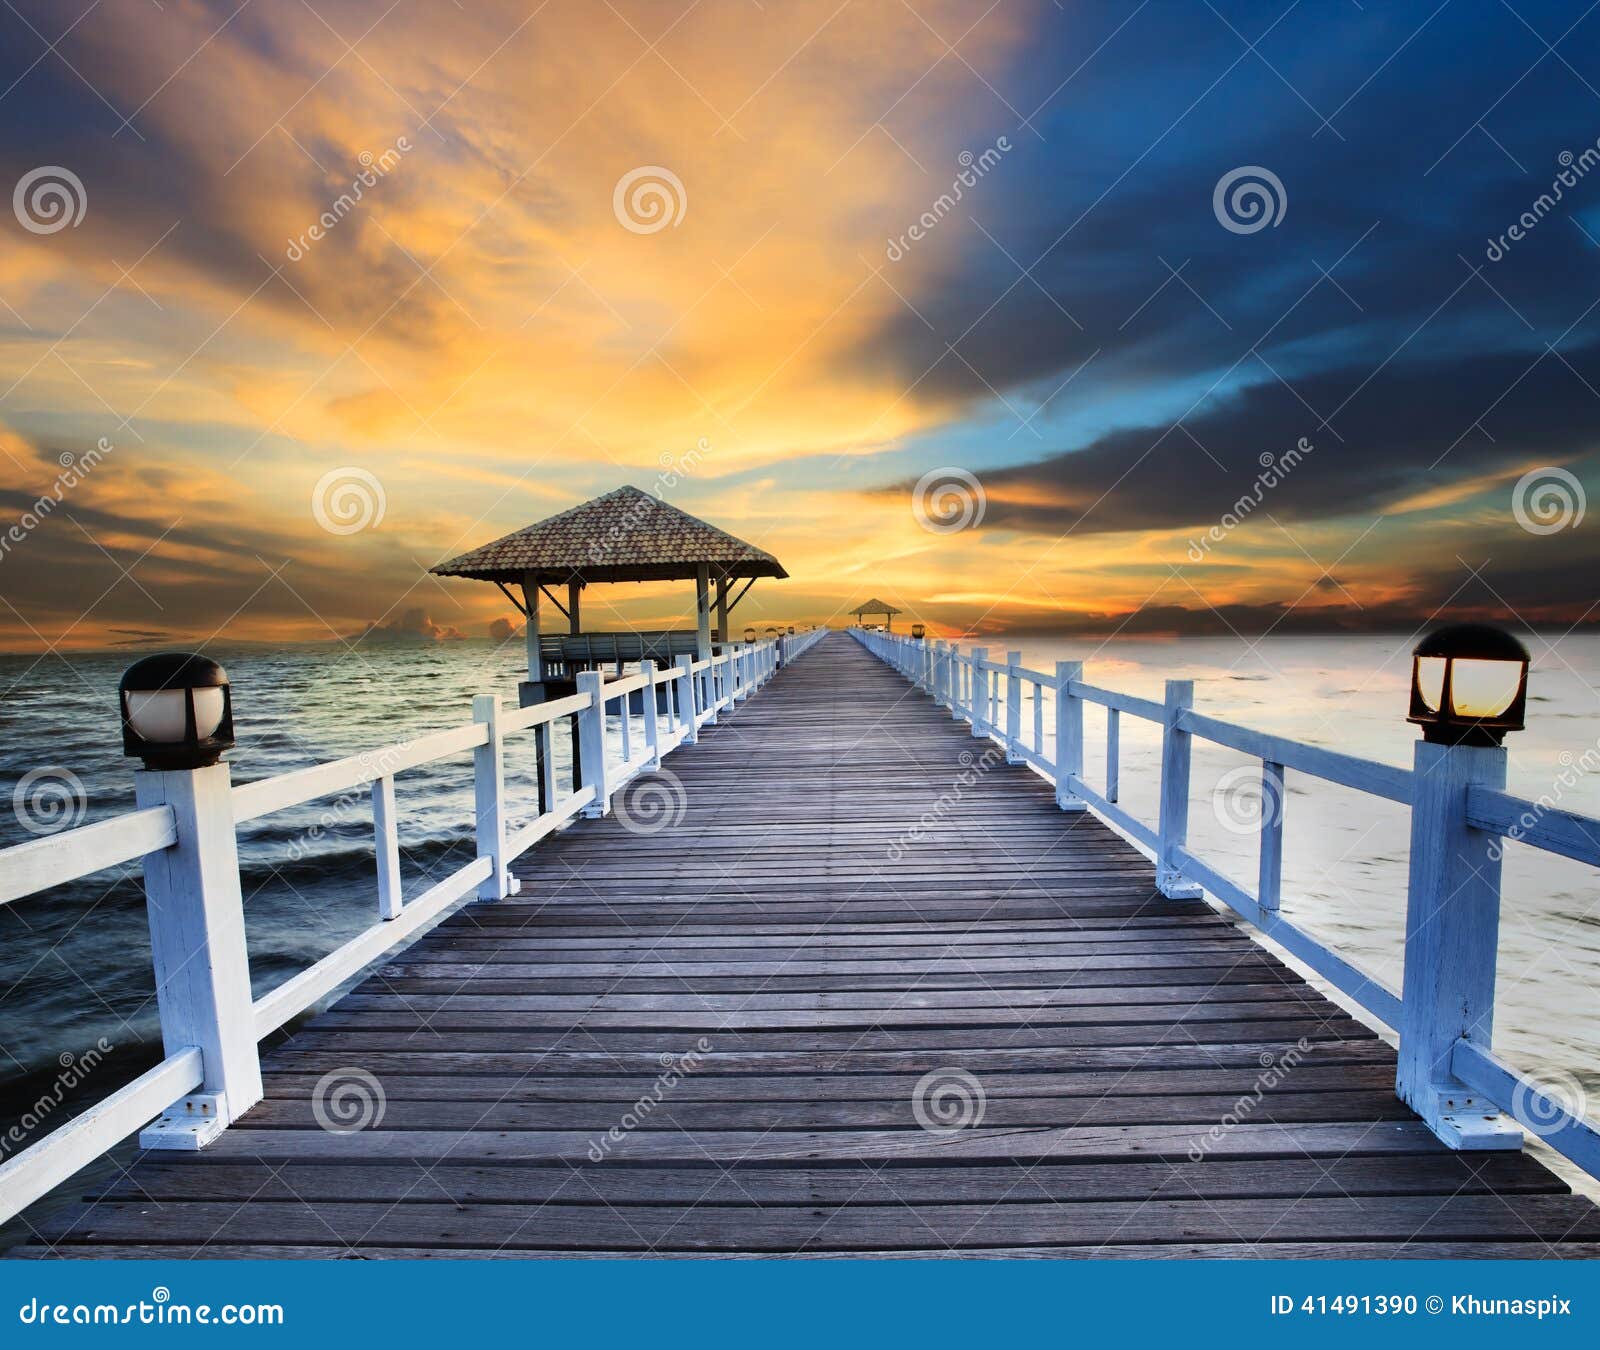 wood piers and sea scene with dusky sky use for natural background ,backdrop